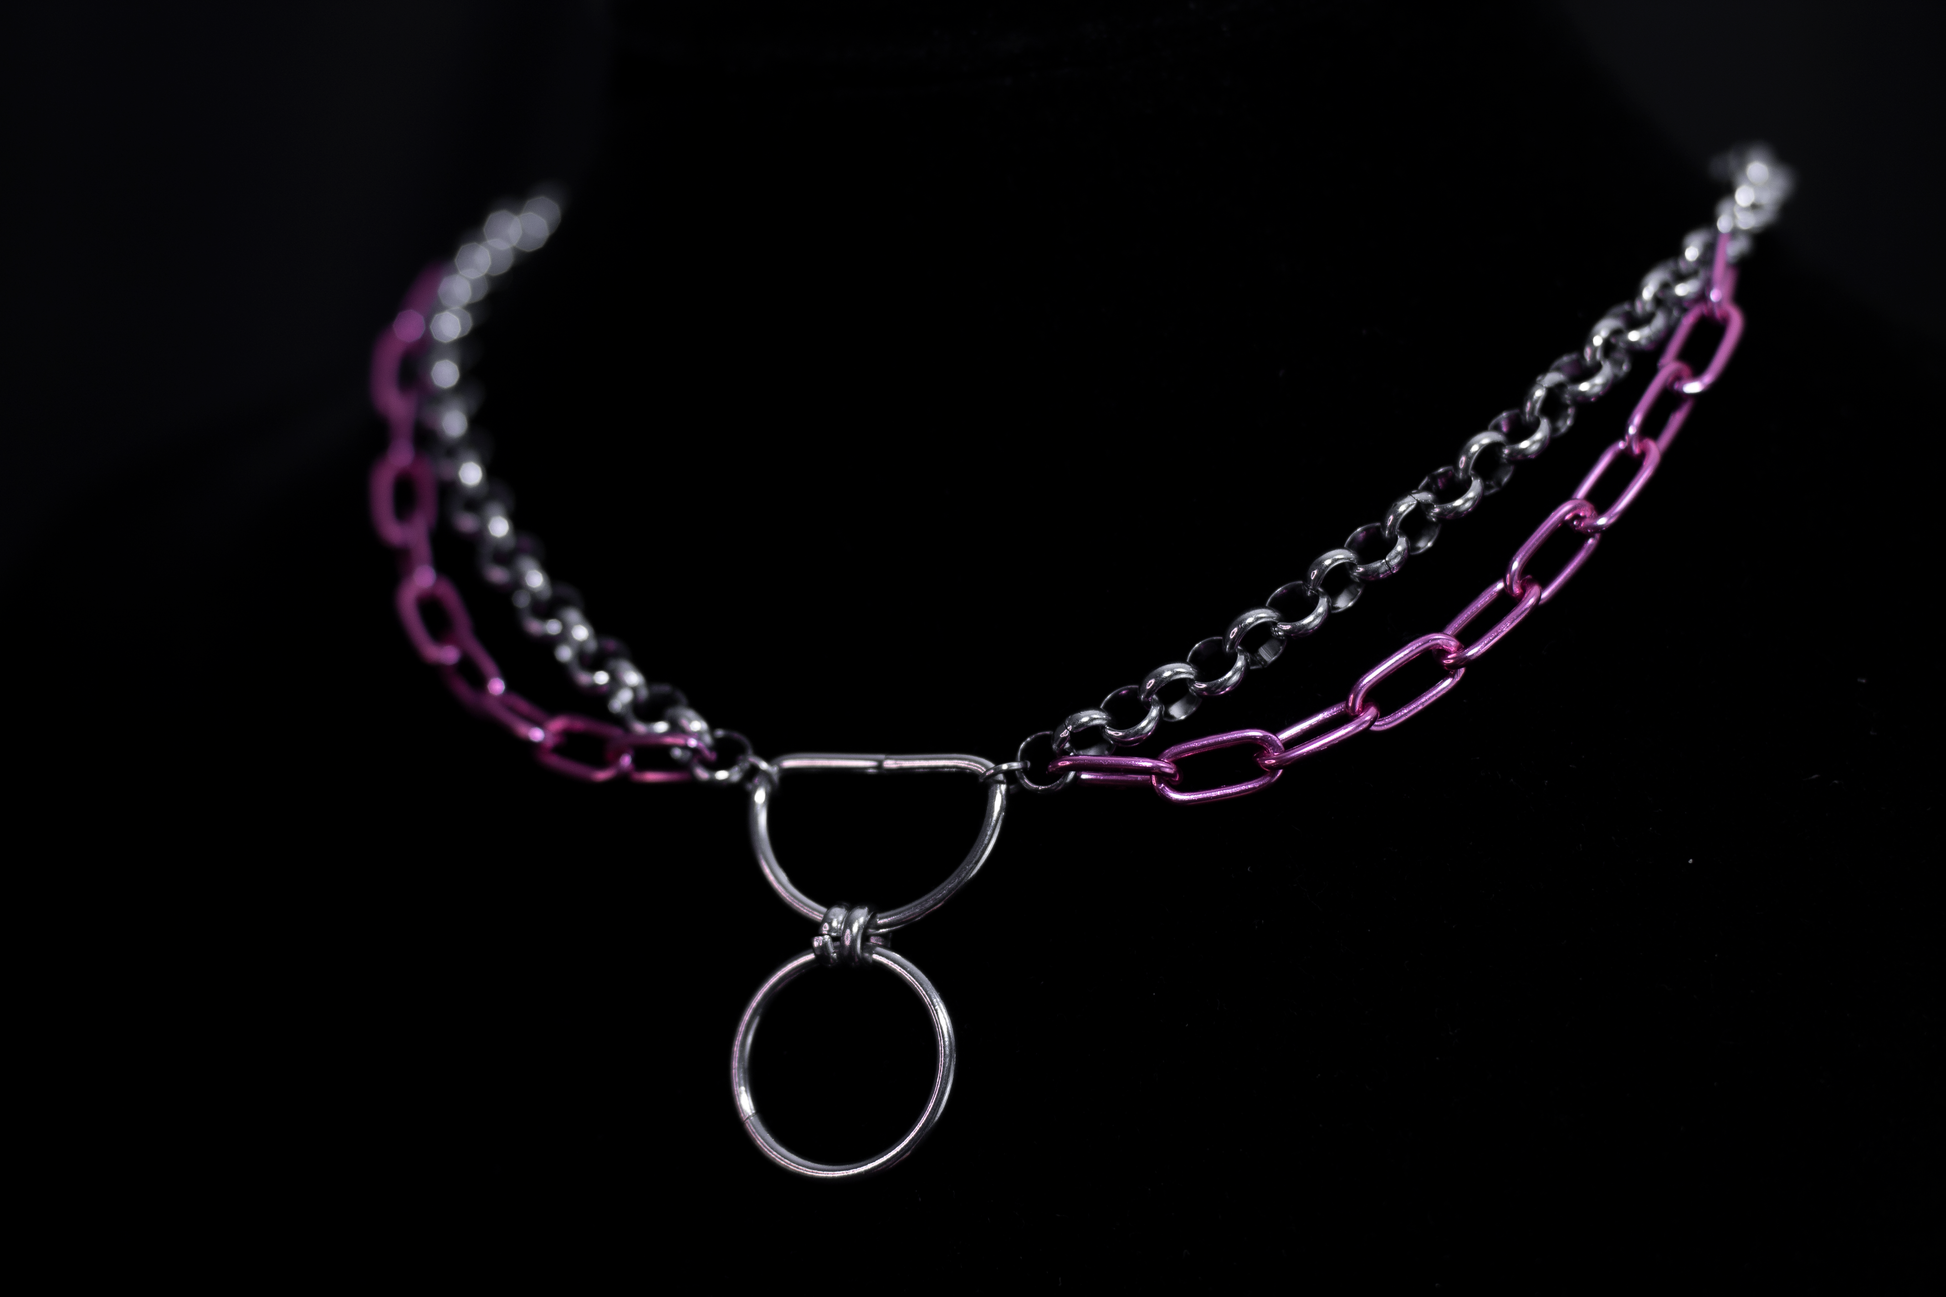 Discover Myril Jewels' unique silver chain necklace accented with striking pink links. A perfect blend of neo-goth elegance and punk edginess, this piece is ideal for adding a bold touch to any outfit, from everyday wear to festival ensembles. Shop now for an exquisite gothic-chic addition to your jewelry collection